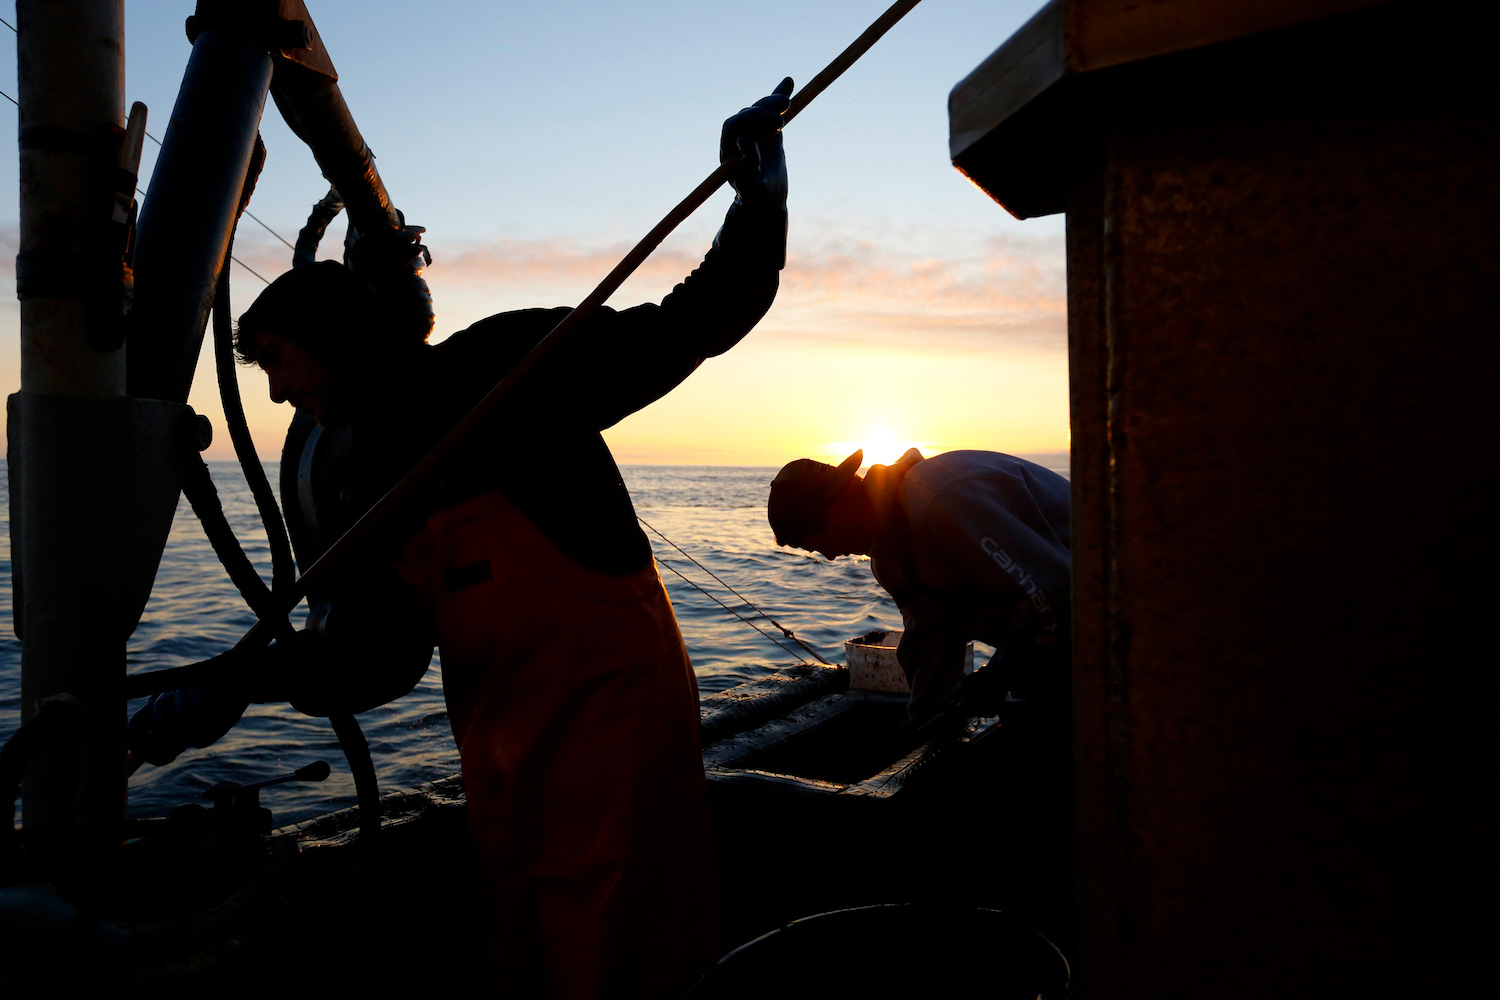 The crew refills bait boxes and shoves crab pots overboard for hours, day and night. March 2022